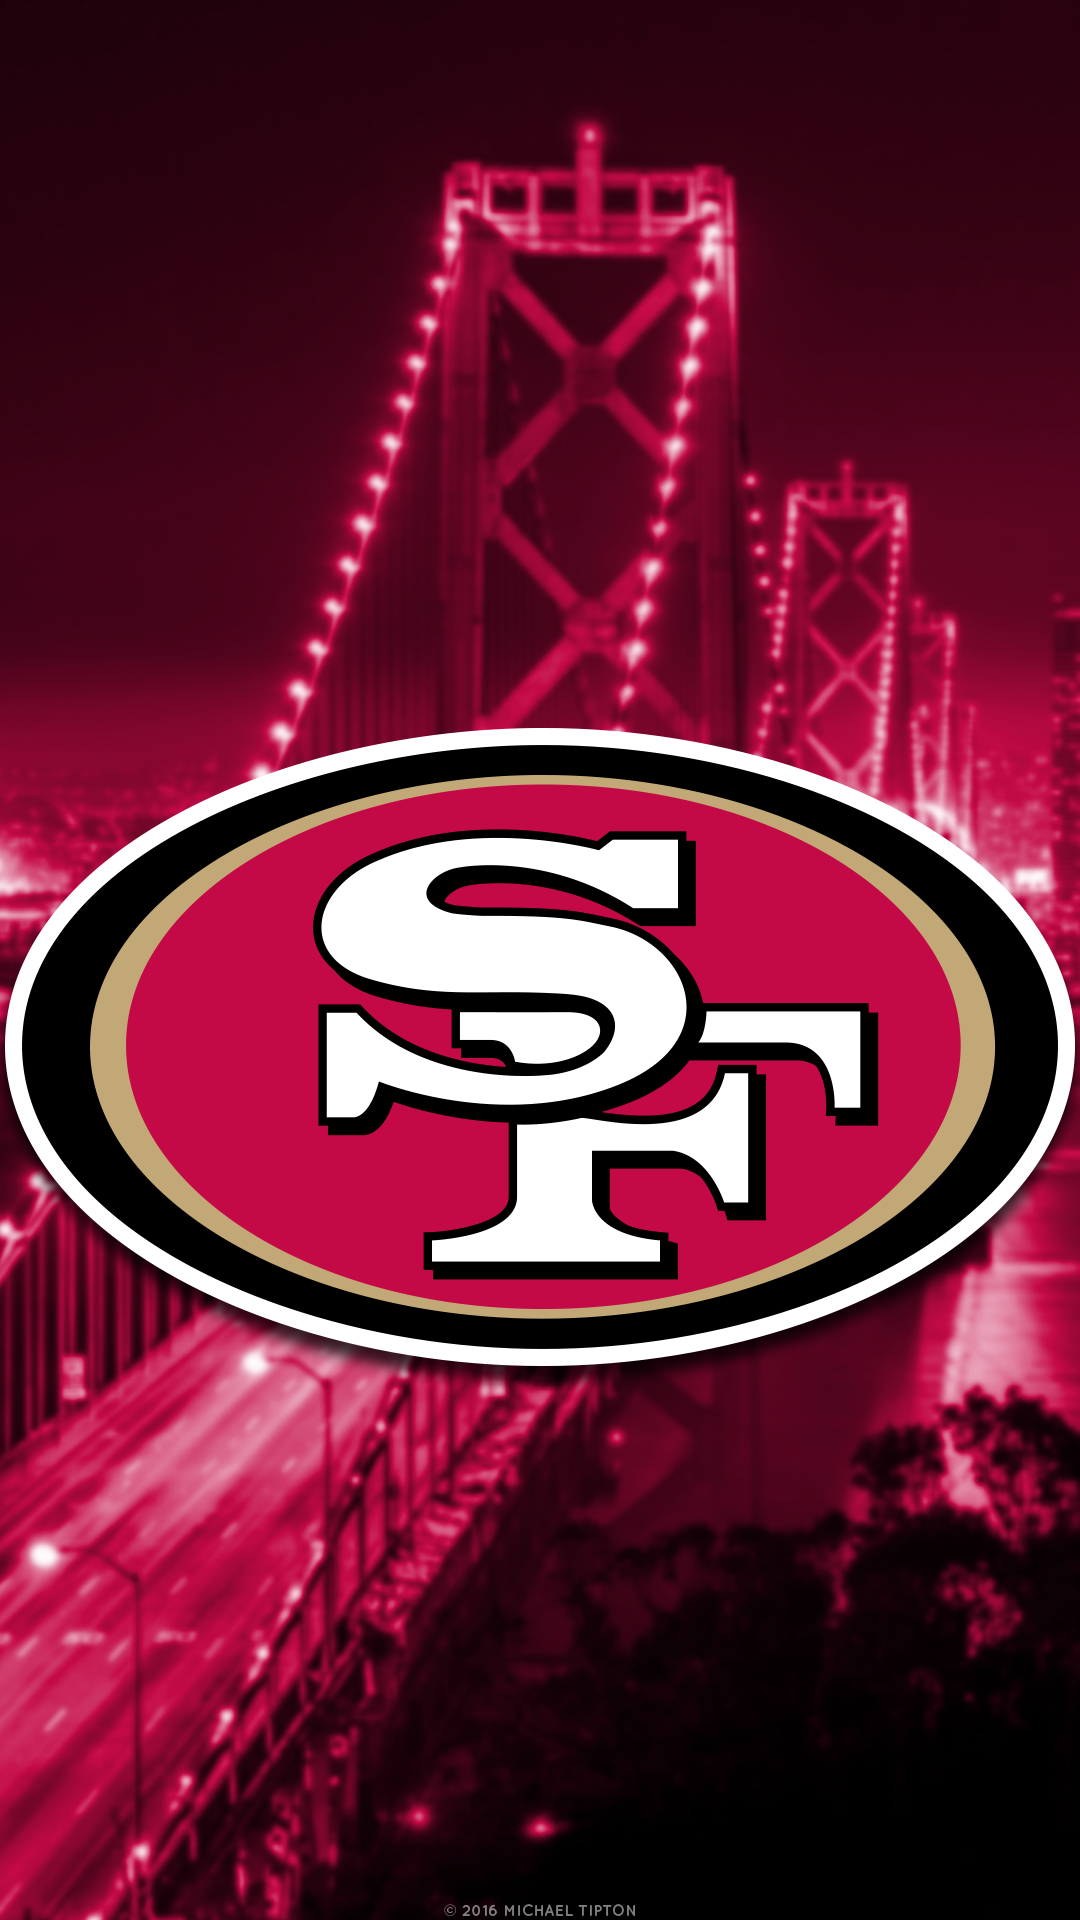 Free download 2017 San Francisco 49ers Wallpaper PC iPhone Android [1080x1920] for your Desktop, Mobile & Tablet. Explore San Francisco 49ers Wallpaper 2017. San Francisco 49ers Wallpaper Wallpaper